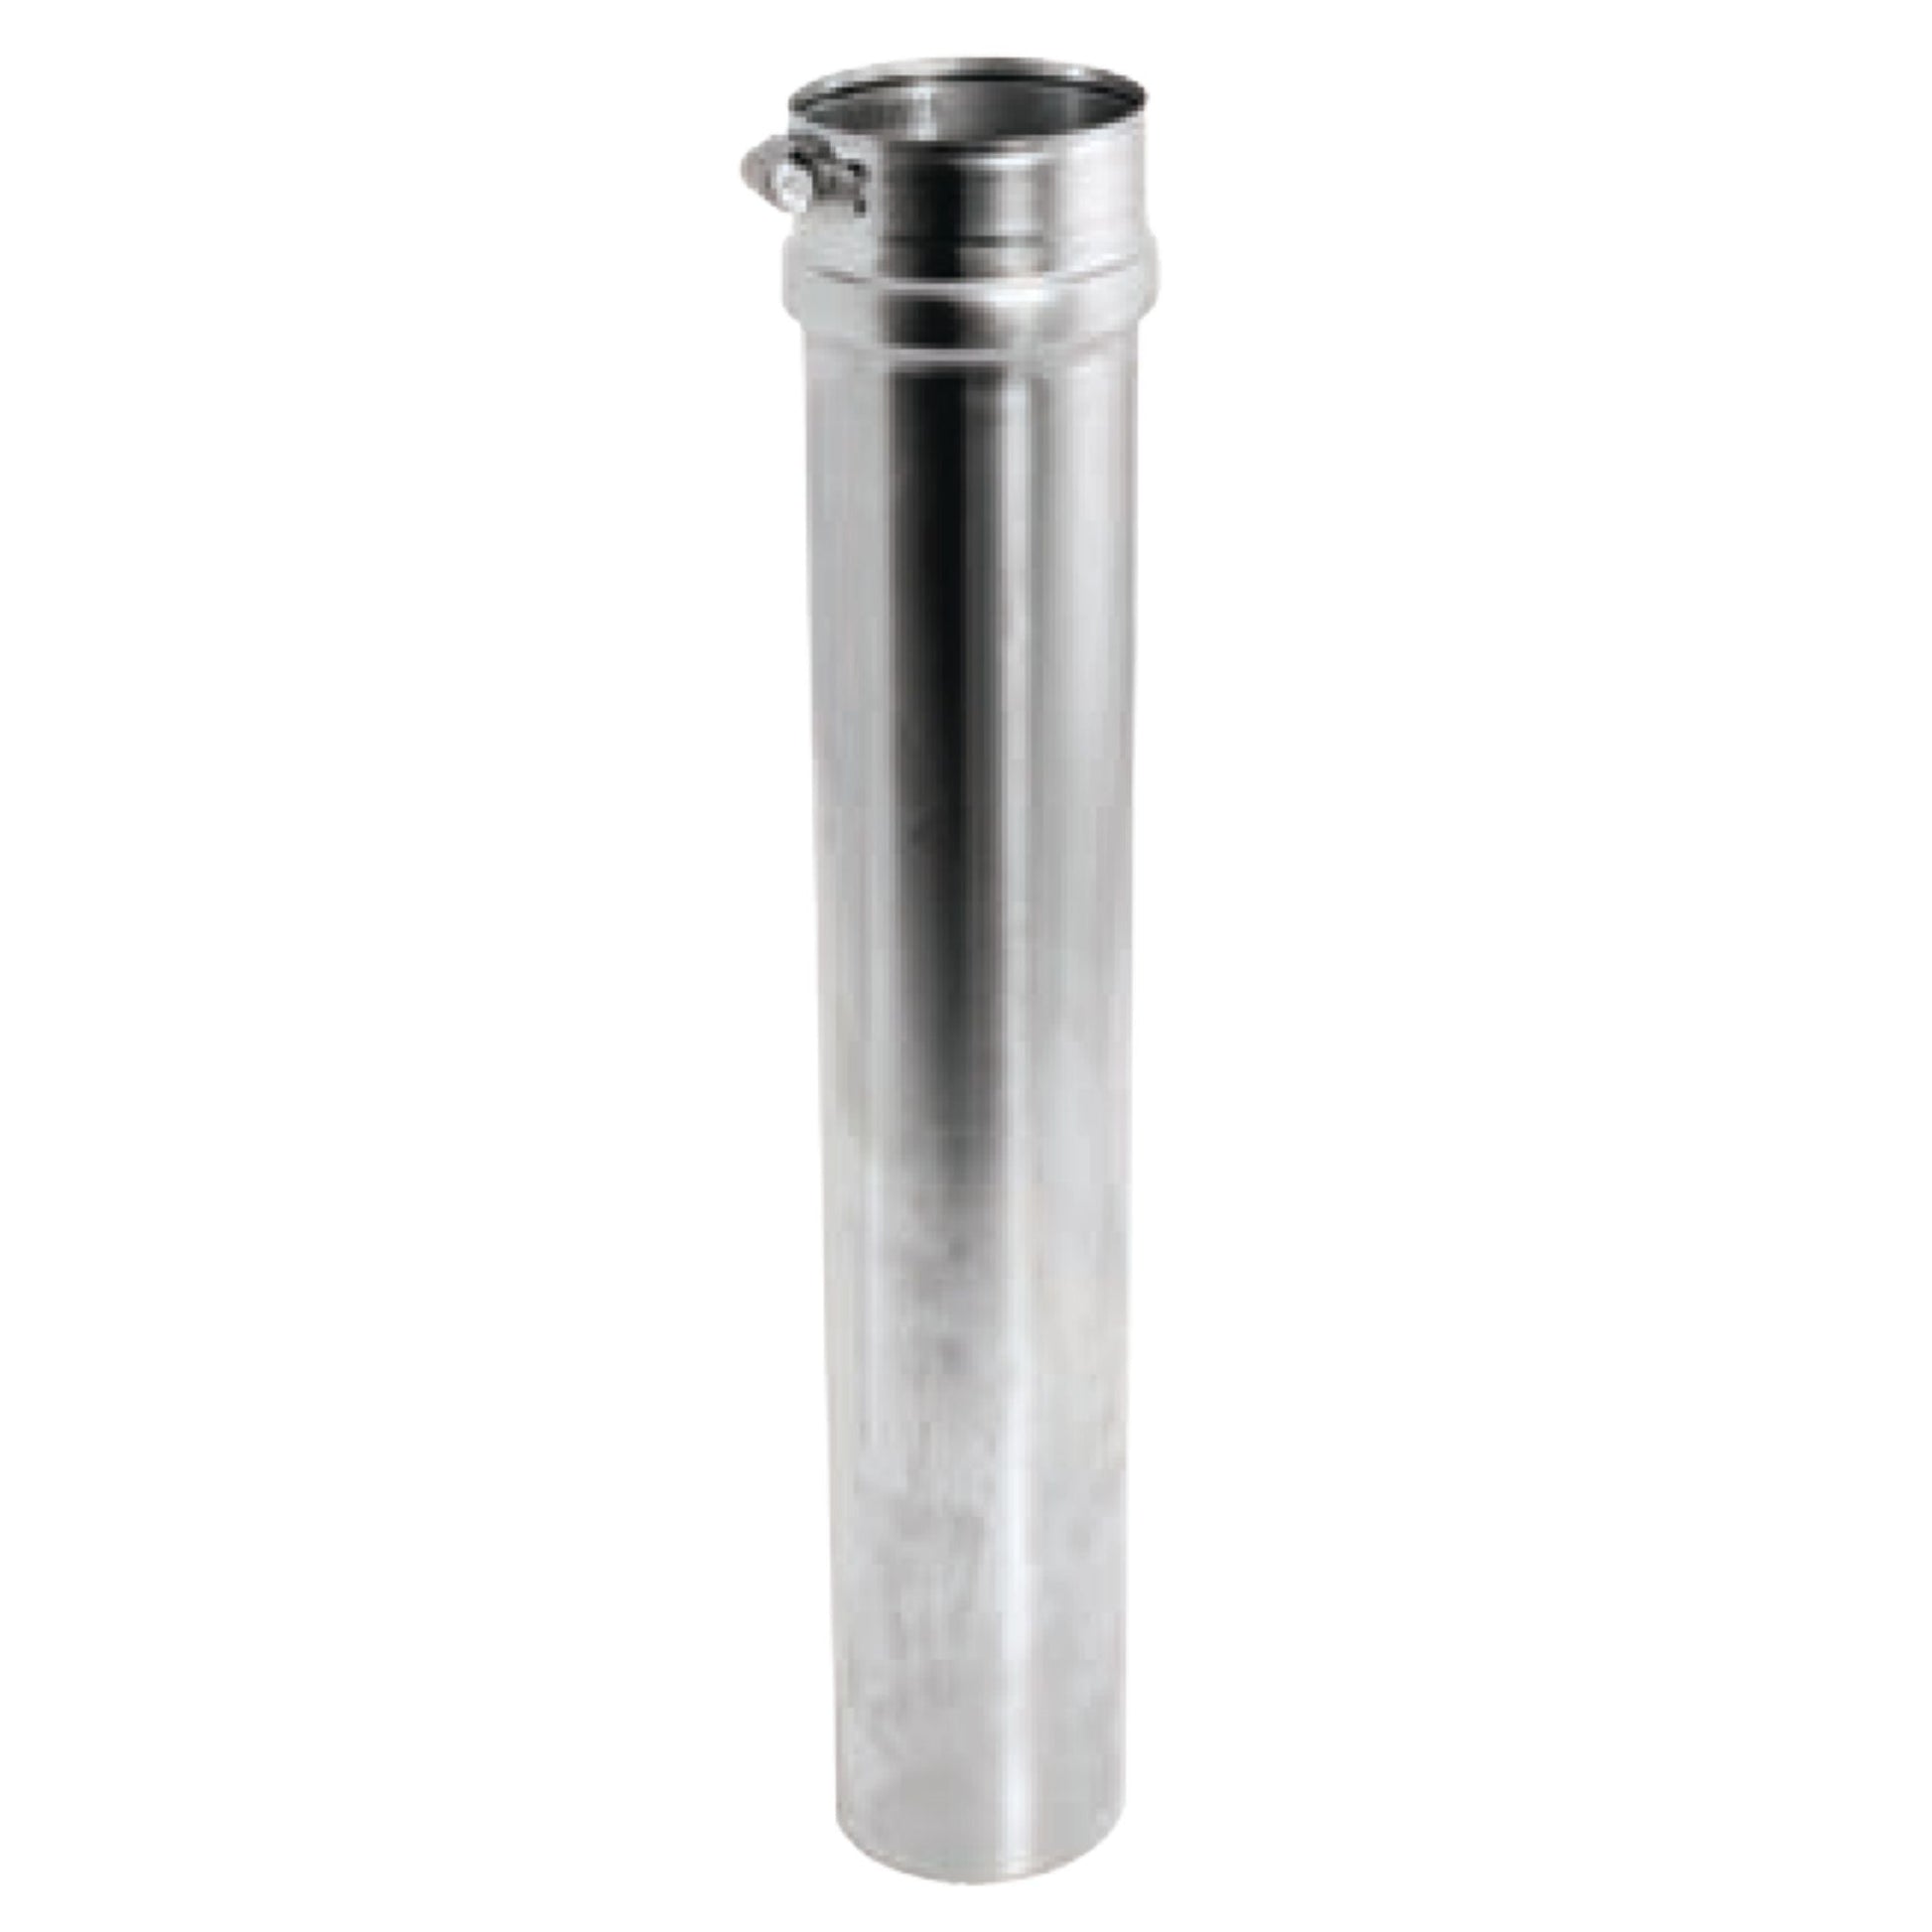 DuraVent FasNSeal 10" x 18" 29-4C Stainless Steel Adjustable Vent Length